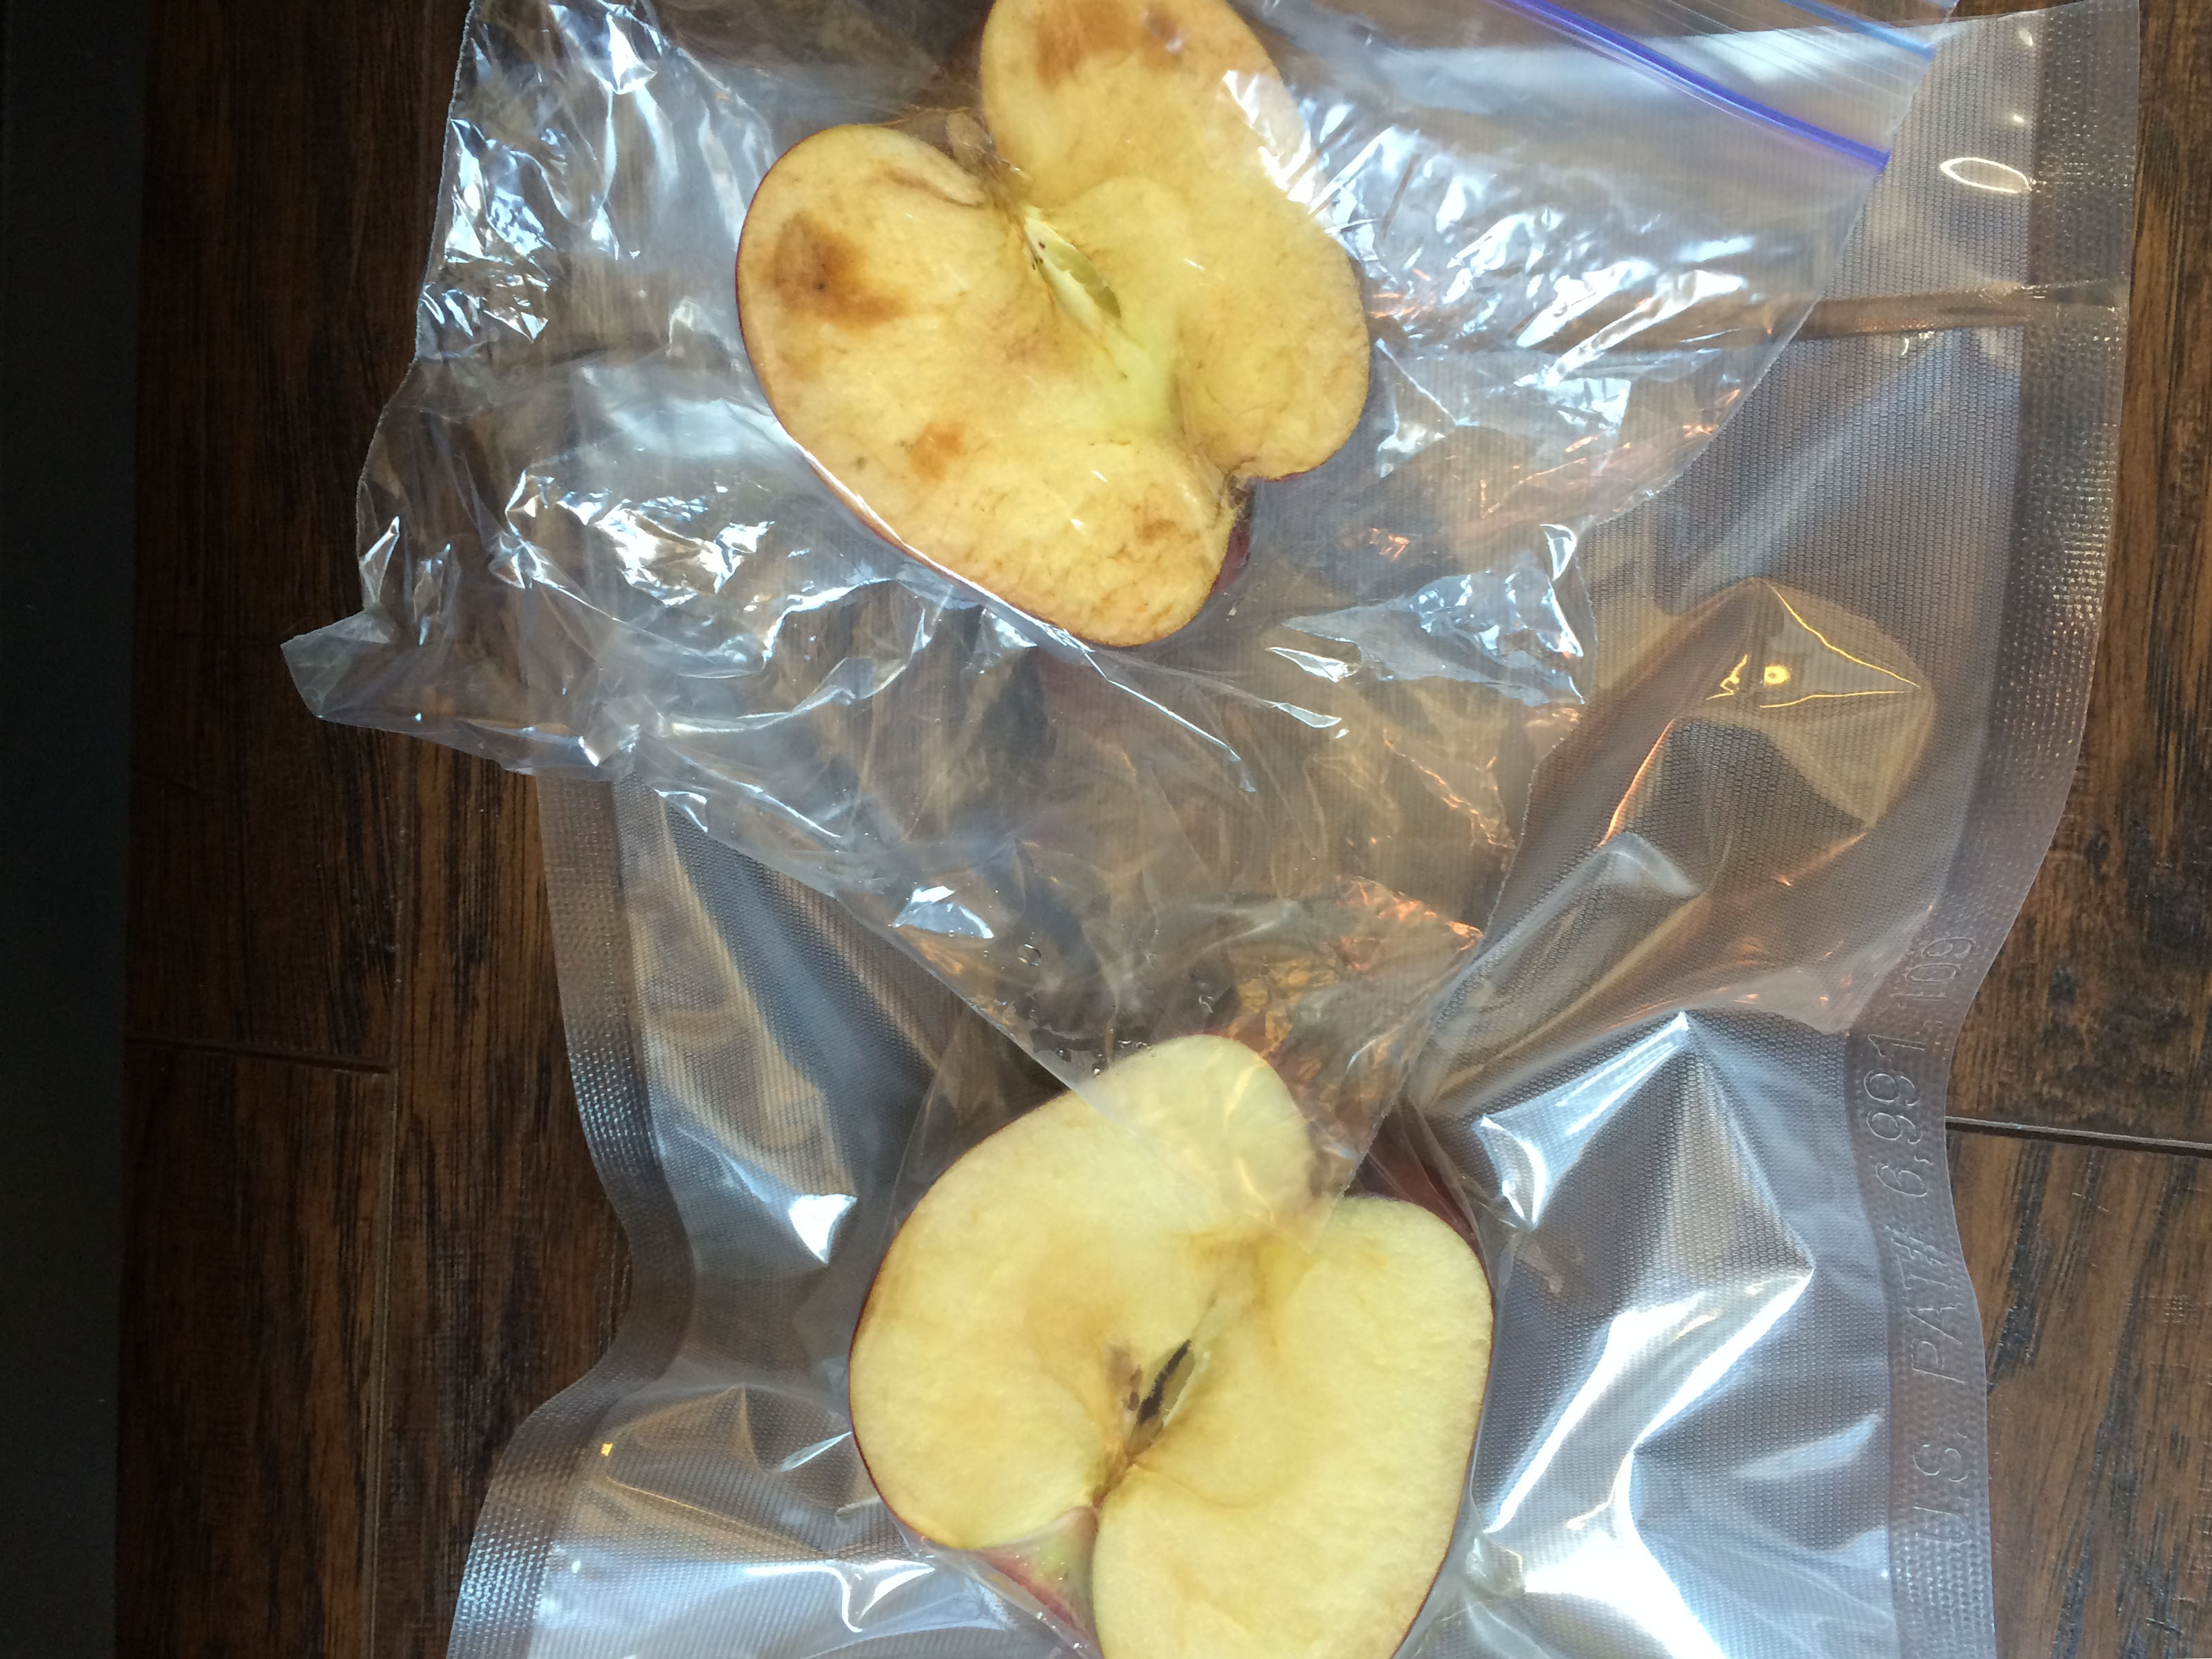 Results of apple experiment